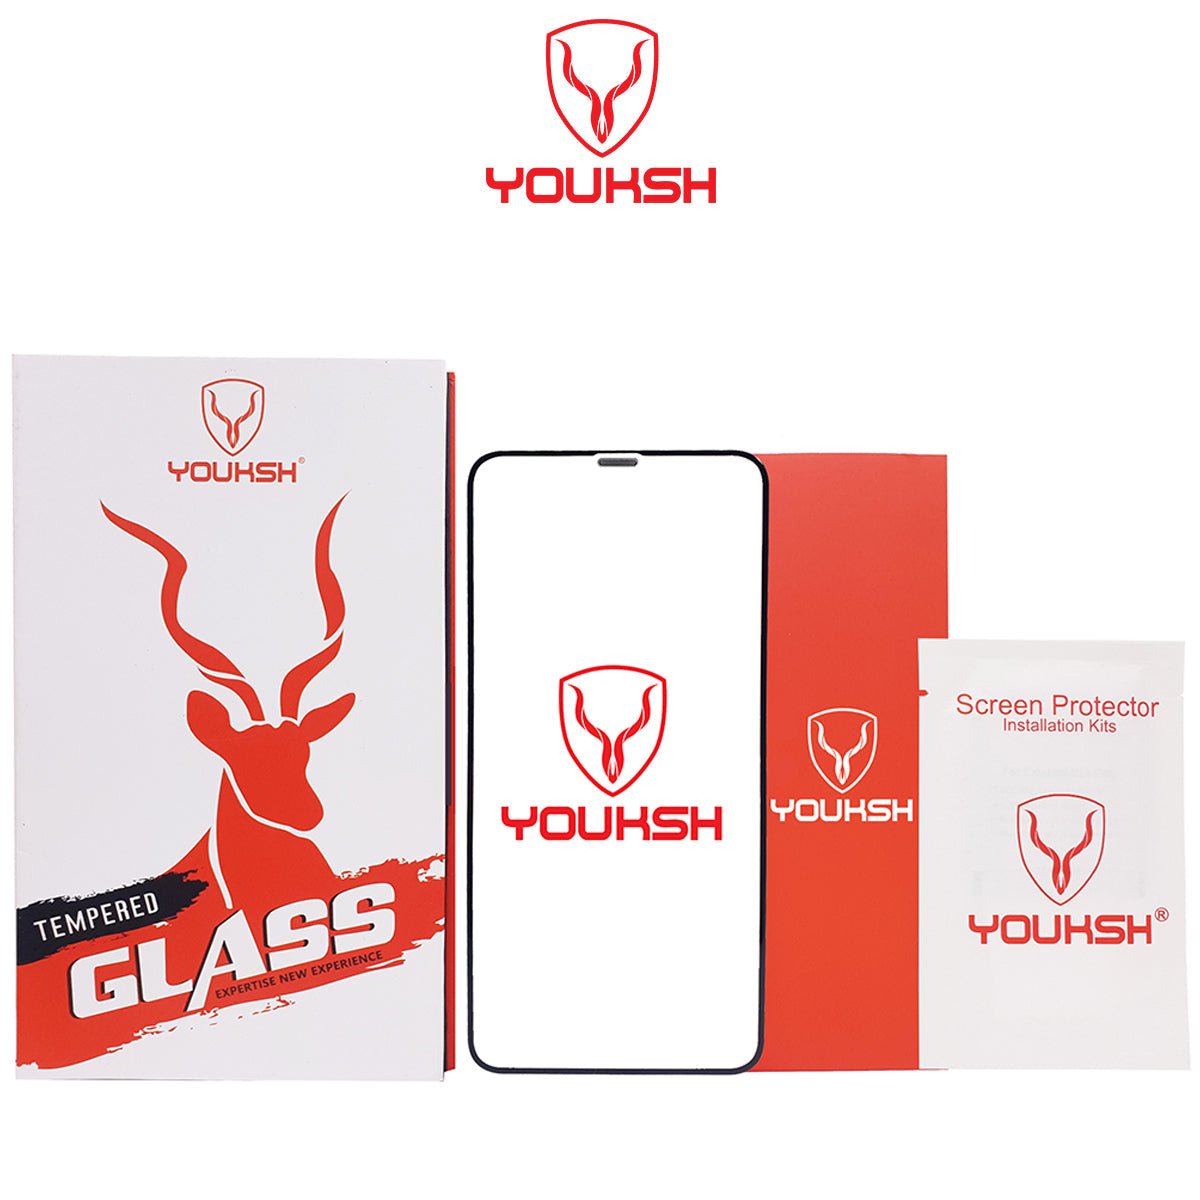 Apple iPhone 12 Pro Max - Youksh Anti Dust Glass Protector With Installation kit.